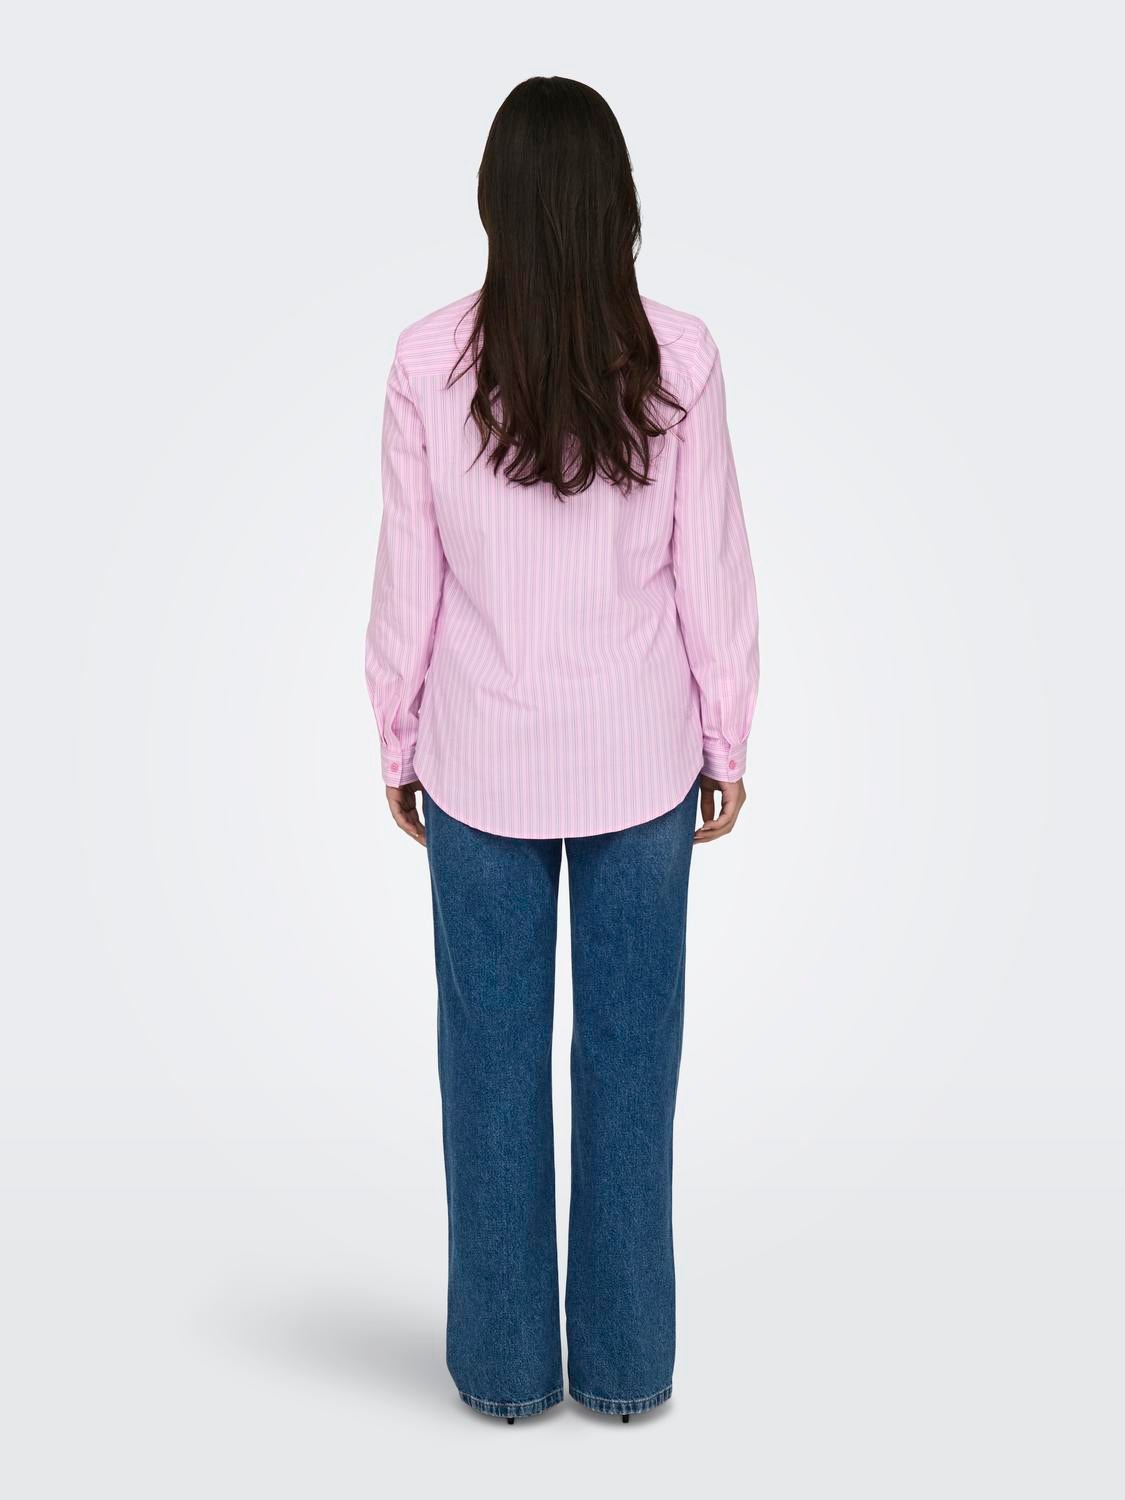 ONLY Regular Fit Shirt collar Buttoned cuffs Slim fitted sleeves Shirt -Begonia Pink - 15149877